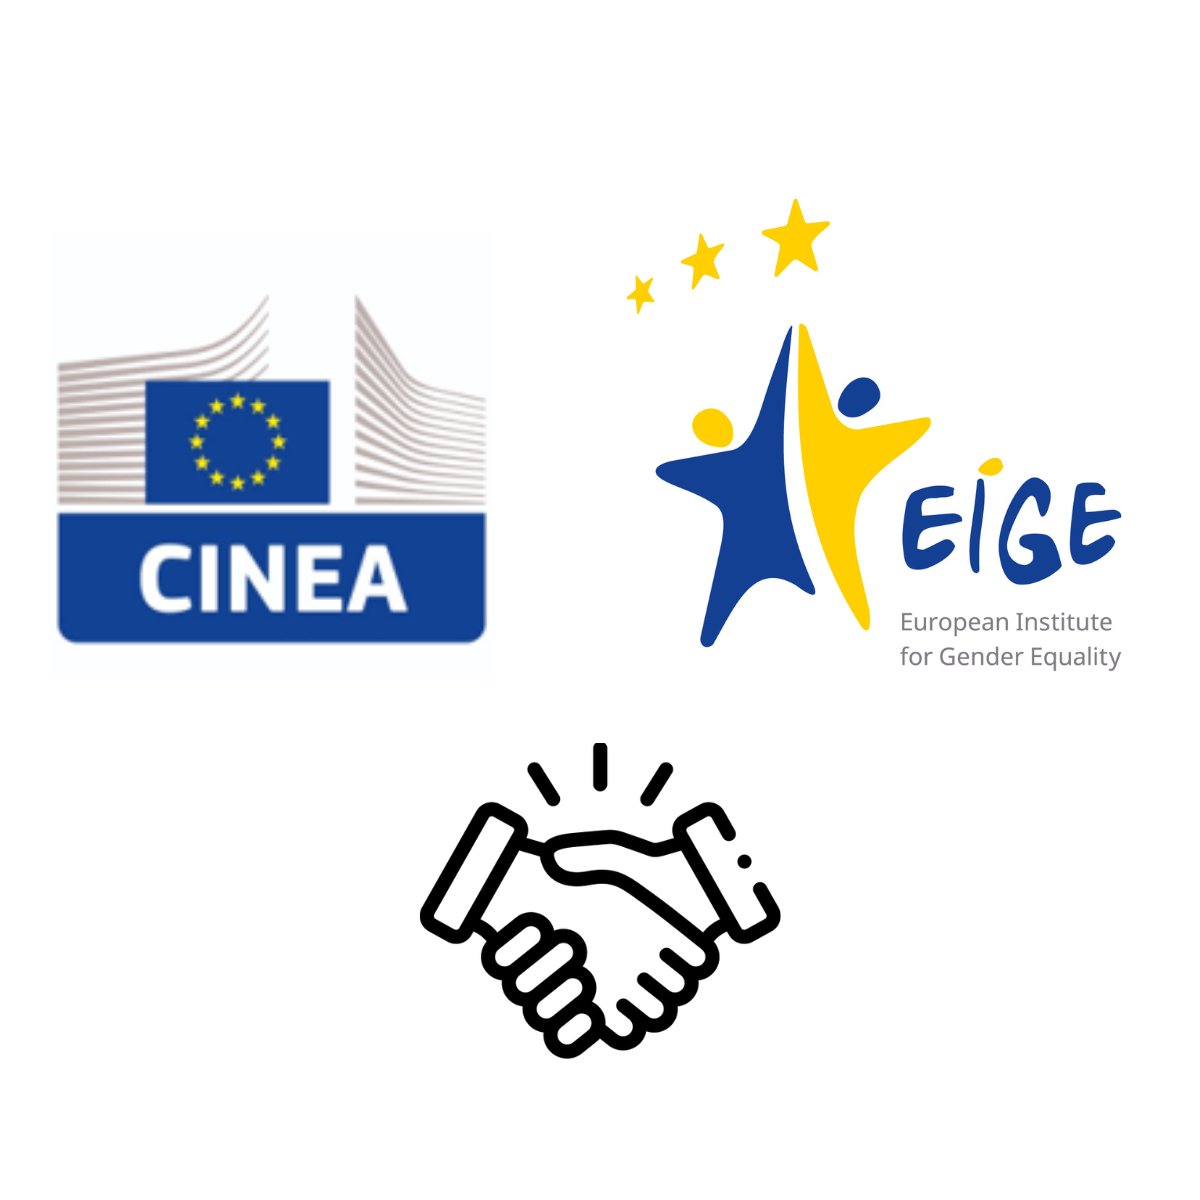 Delighted to meet with @cinea_eu, to discuss how we can build a #just & #sustainable Europe. Exploring how to develop a holistic approach to research and implementation, best practice sharing and capacity building, on #GenderEquality as part of the #EuropeanGreenDeal.